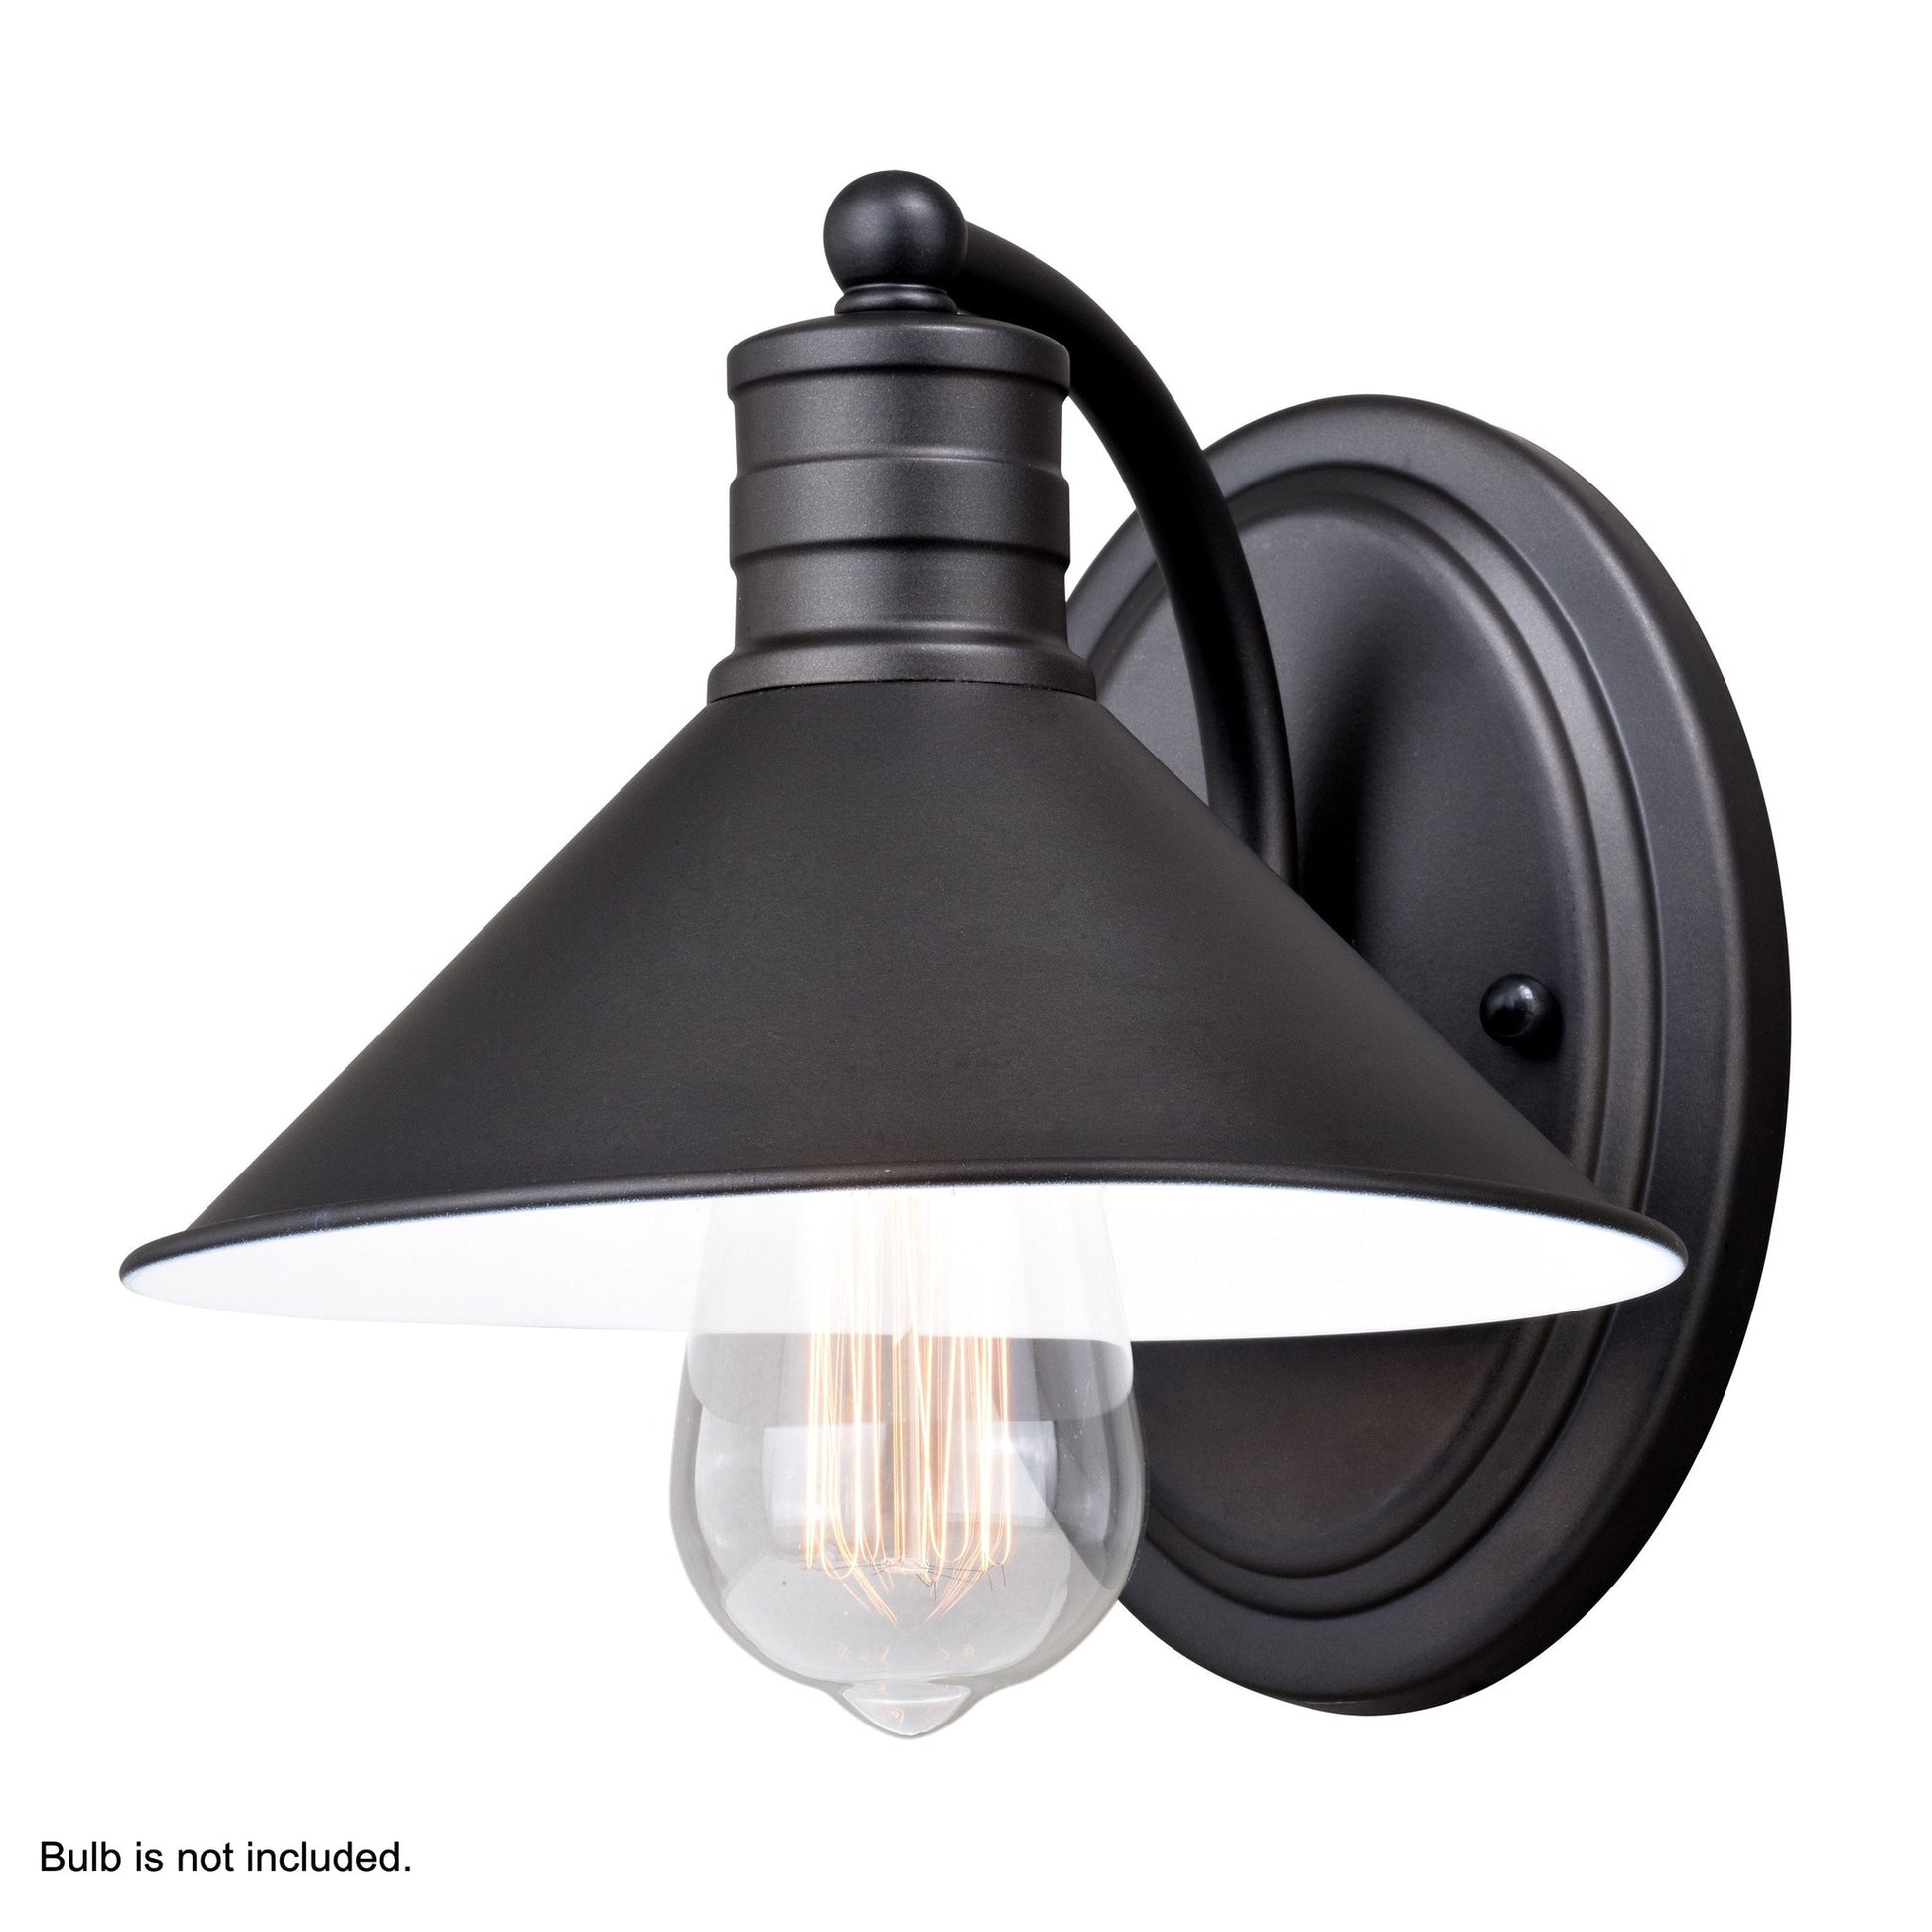 Vaxcel Akron 8" 1-Light Oil Rubbed Bronze and Matte White Vanity Wall Sconce With Metal Shade